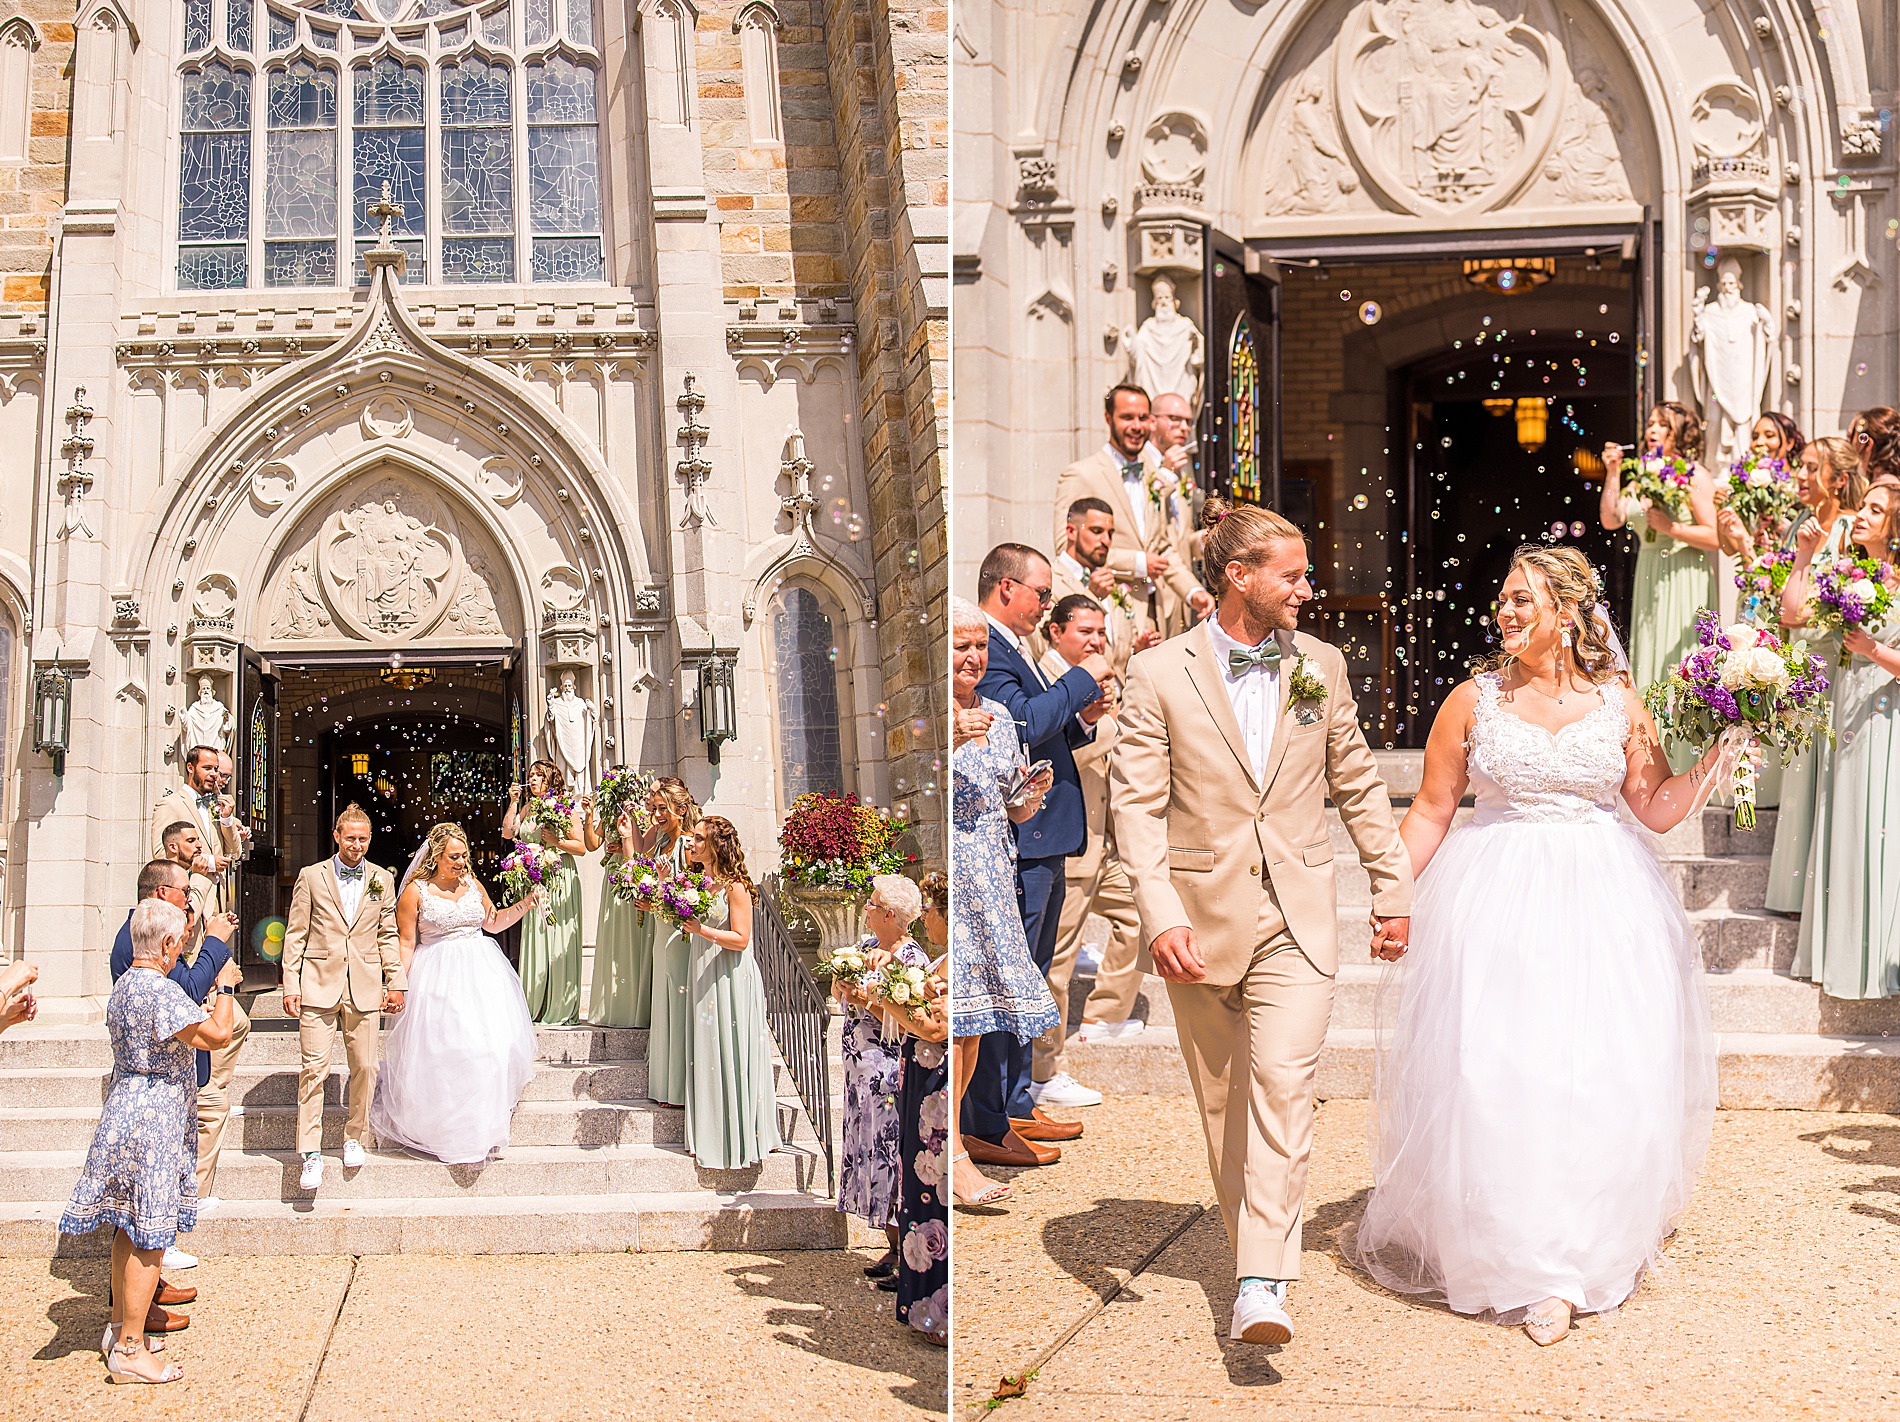 wedding guests blow bubbles as newlyweds exit the church 